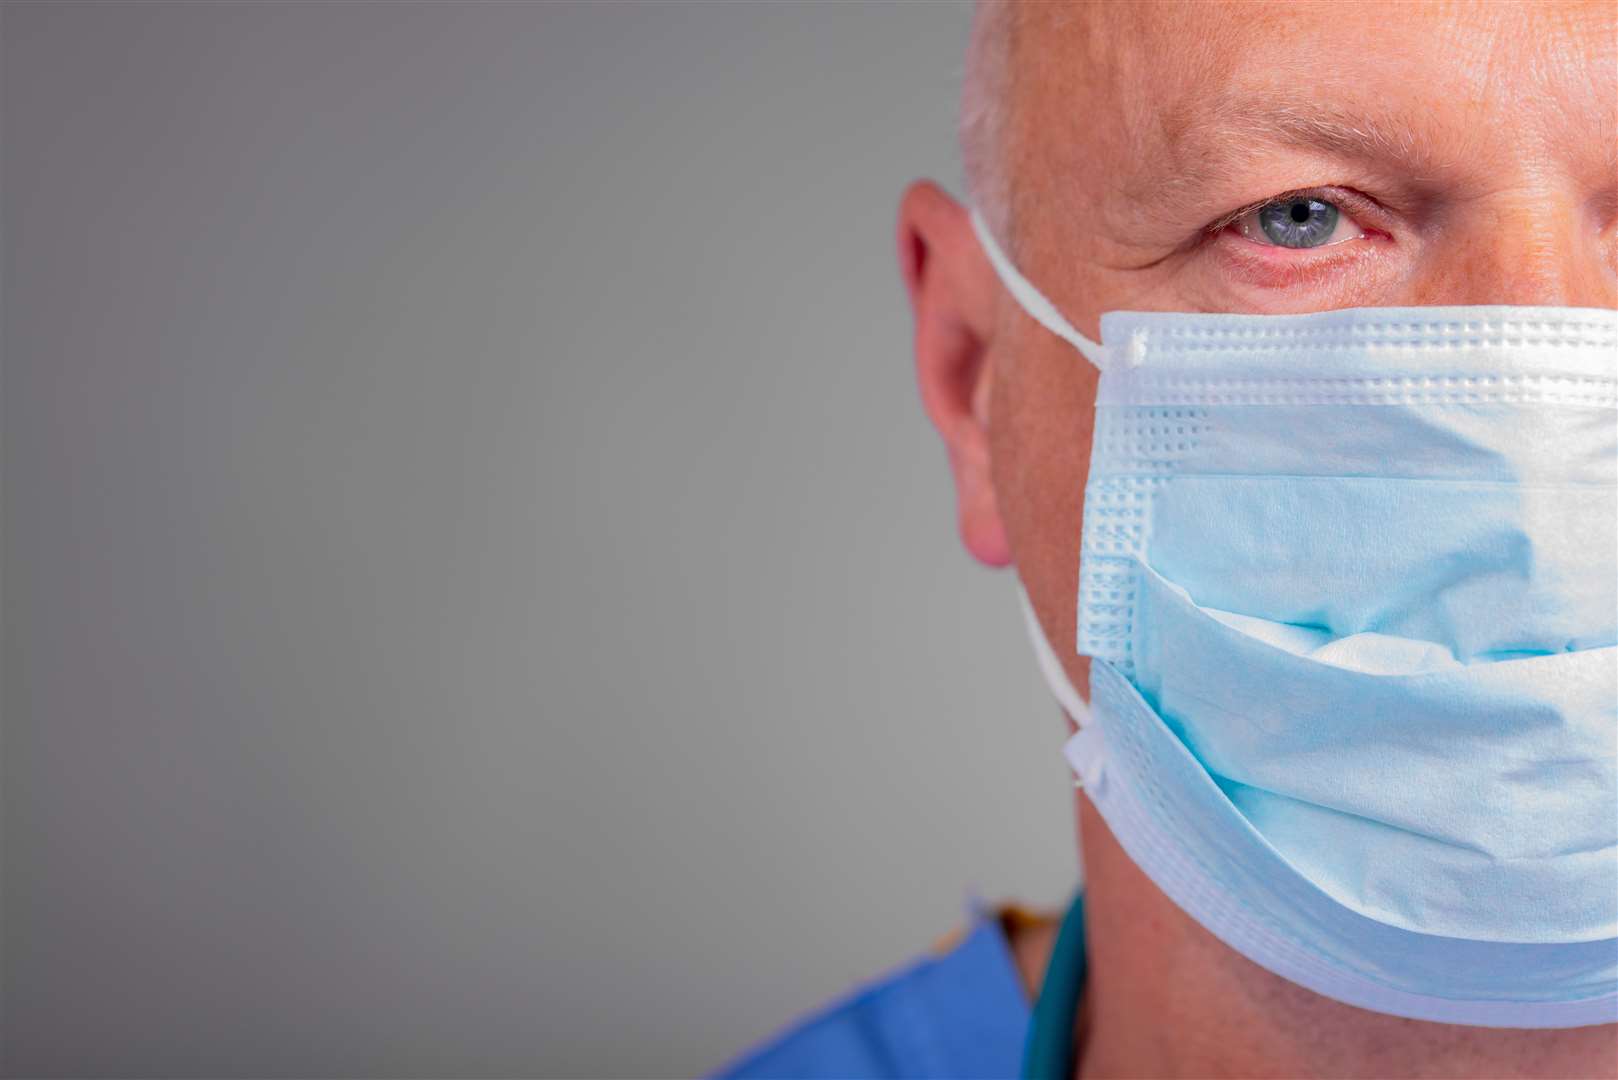 Putting on a mask is now optional but staff will still wear one when needed for clinical care.